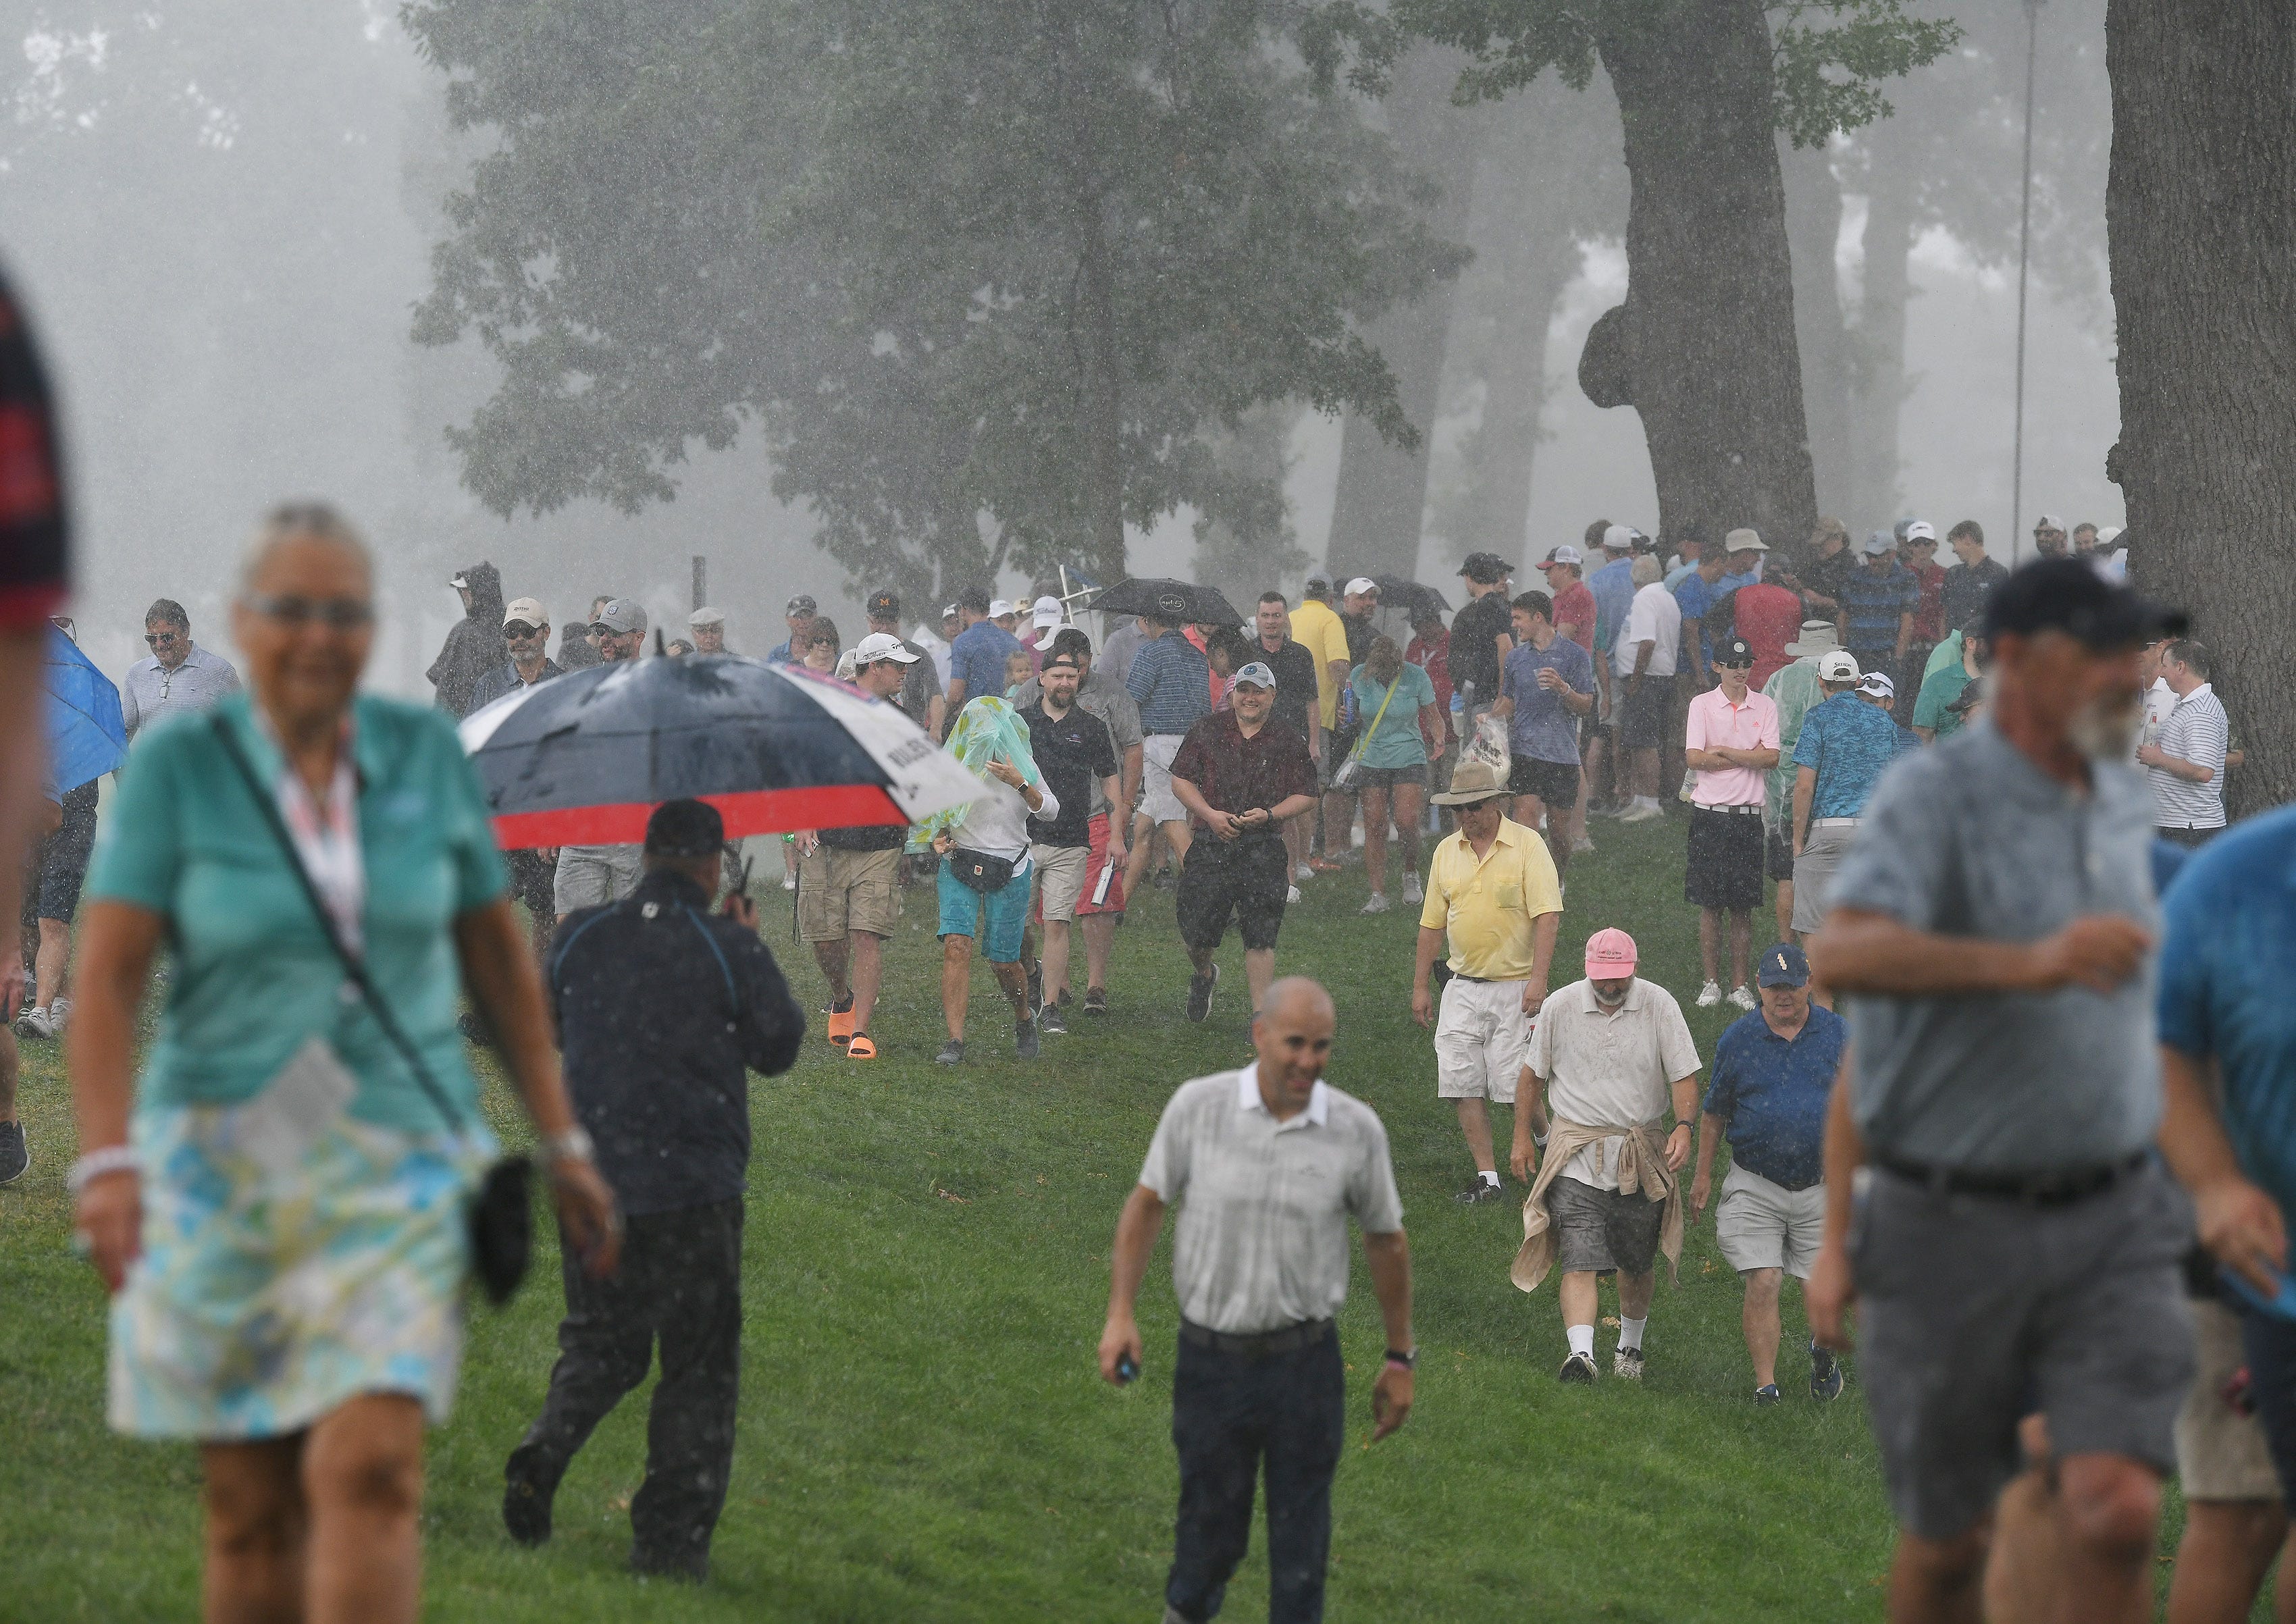 People start to head for cover after a heavy rain falls during Round 1 of the Rocket Mortgage Classic at the Detroit Golf Club.